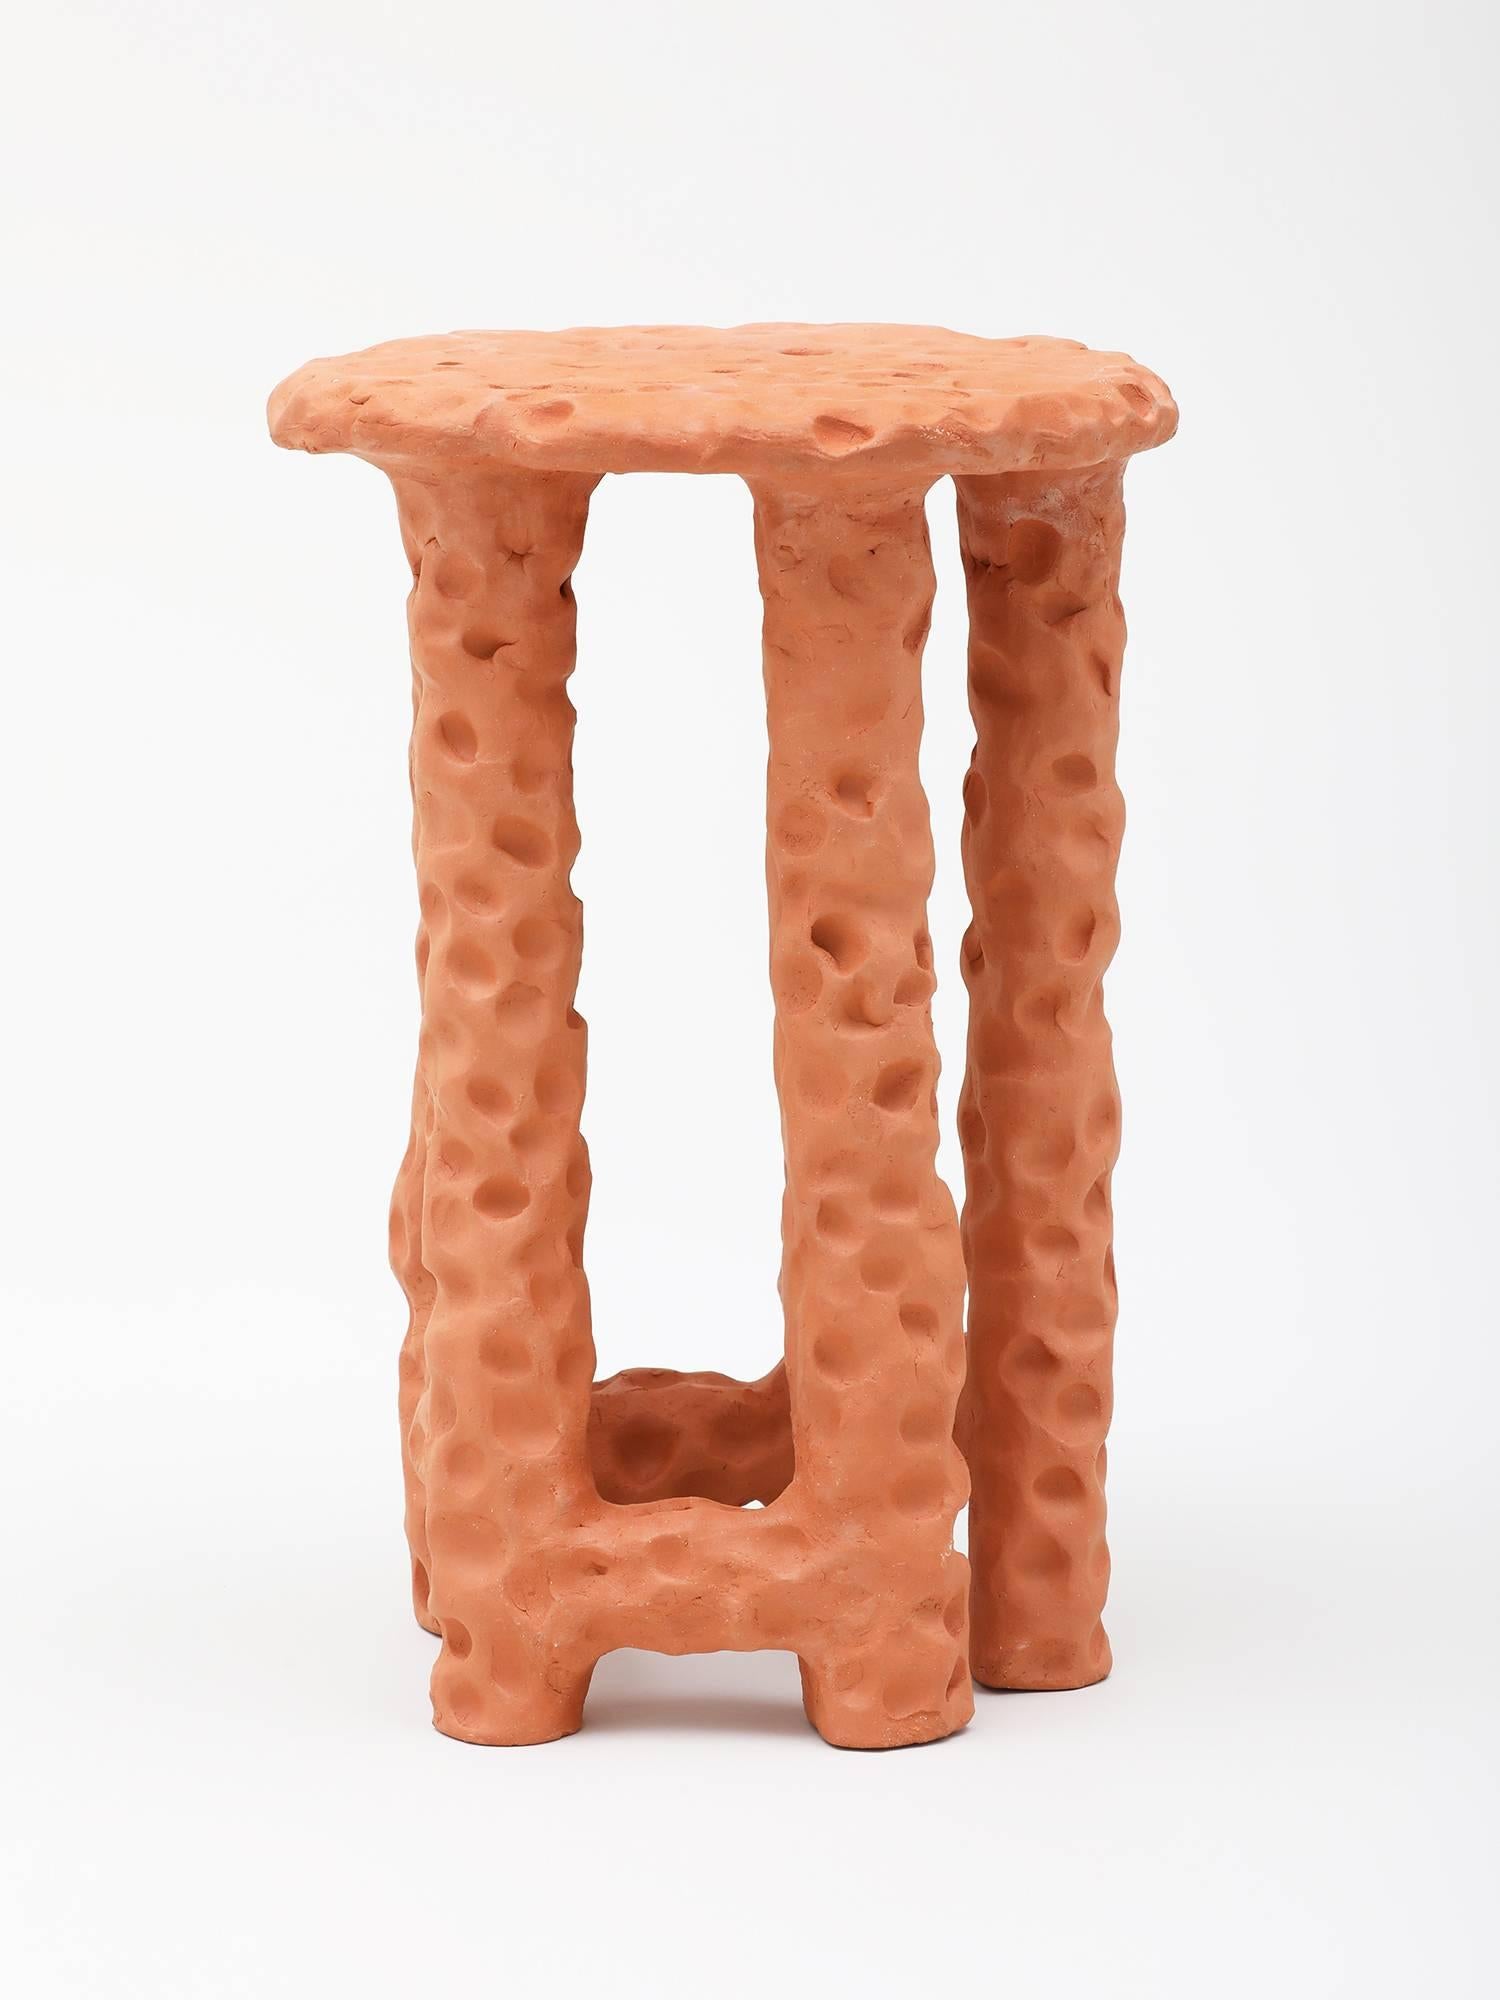 Terracotta side table or stool handmade by New York and Medellín-based artist Chris Wolston. Can be used indoors or outside.